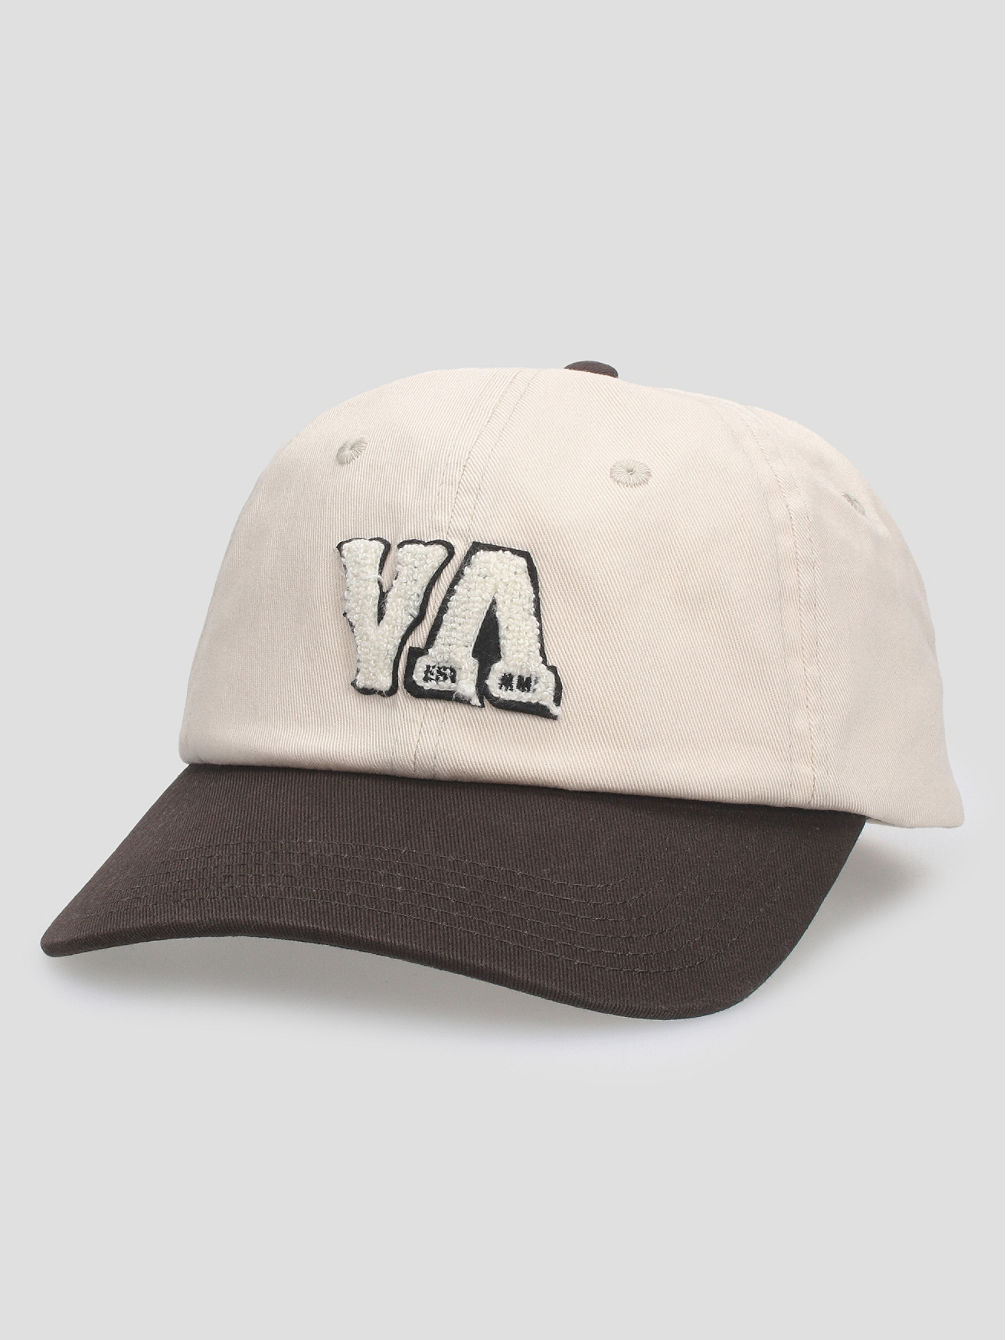 Patched Dad Casquette